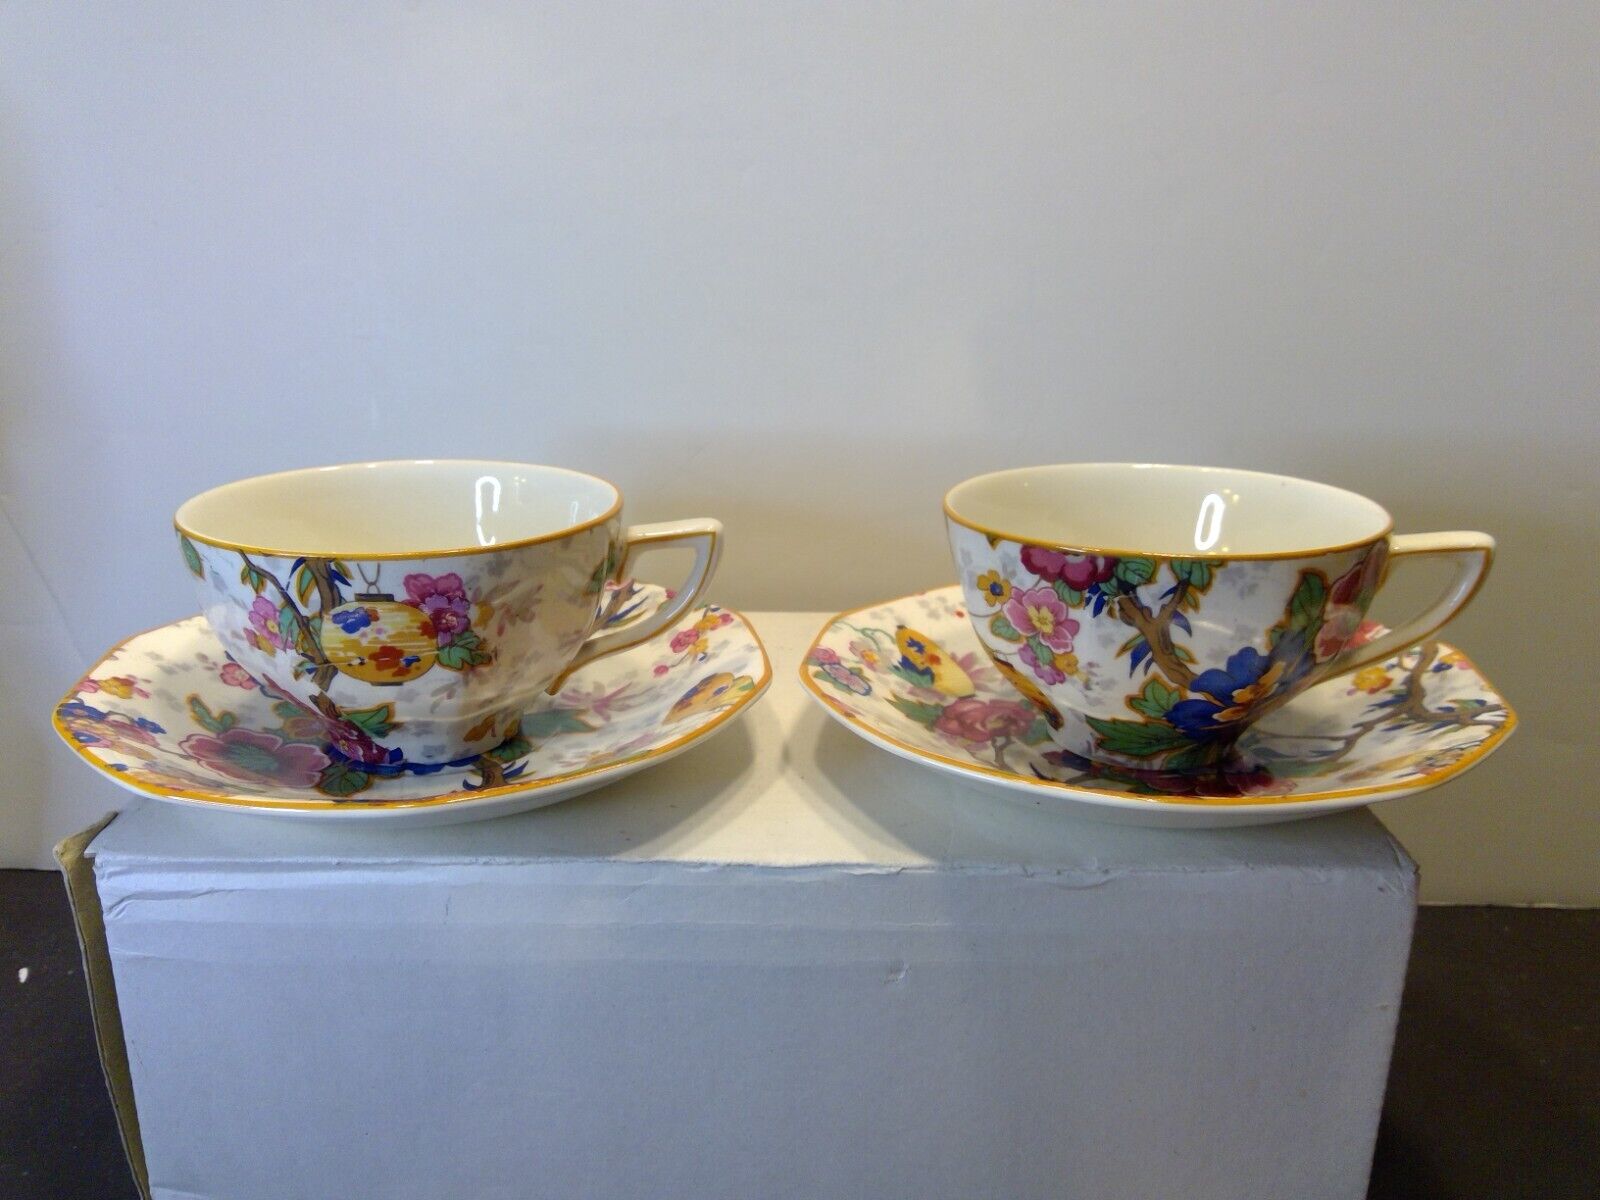 Pair of Crown Ducal Ware England Festival Floral Chintz Cup and Saucer Sets